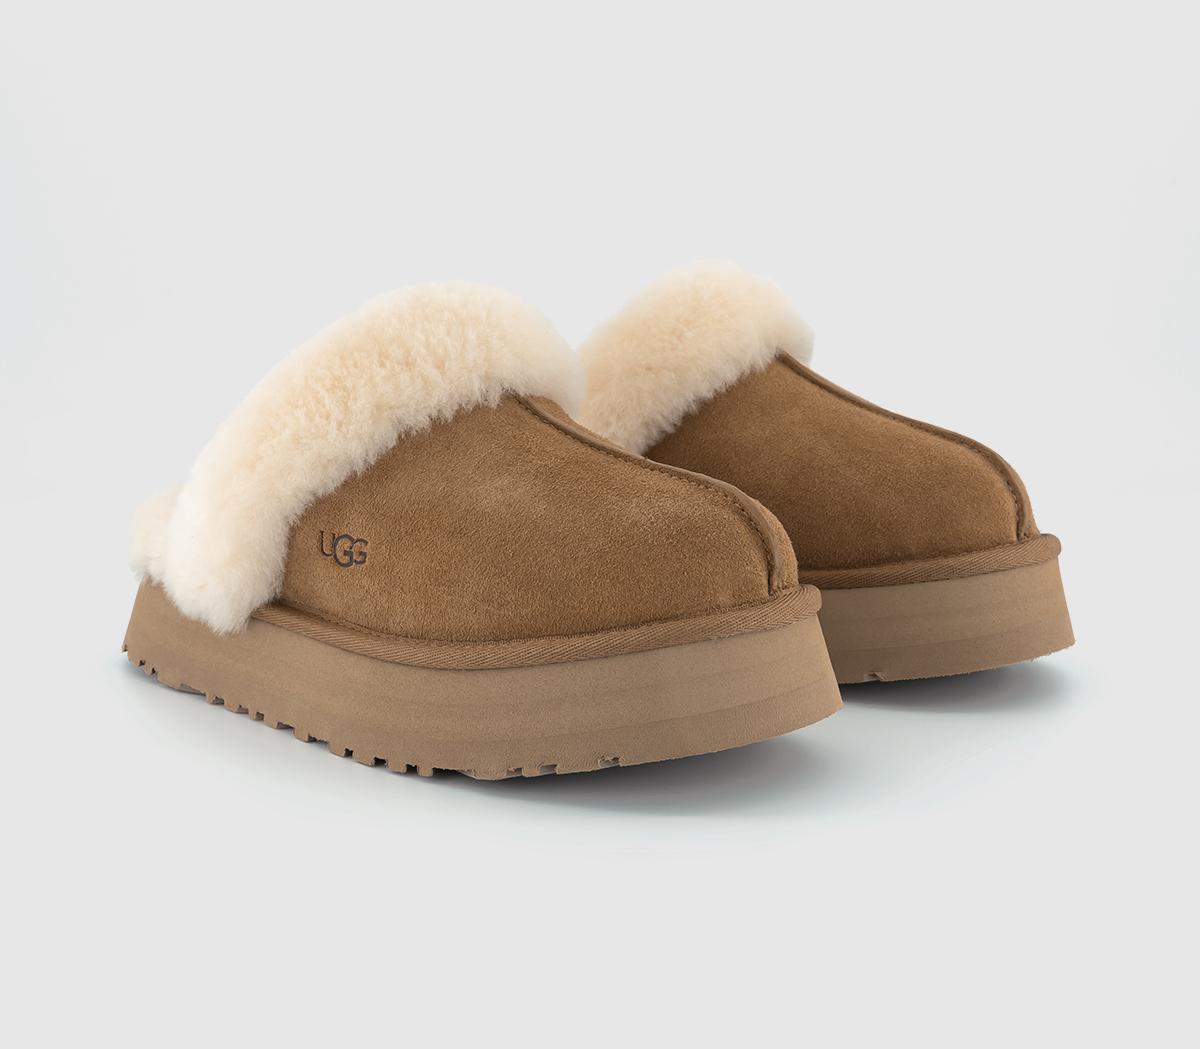 UGG Disquette Slippers Chestnut - Flat Shoes for Women